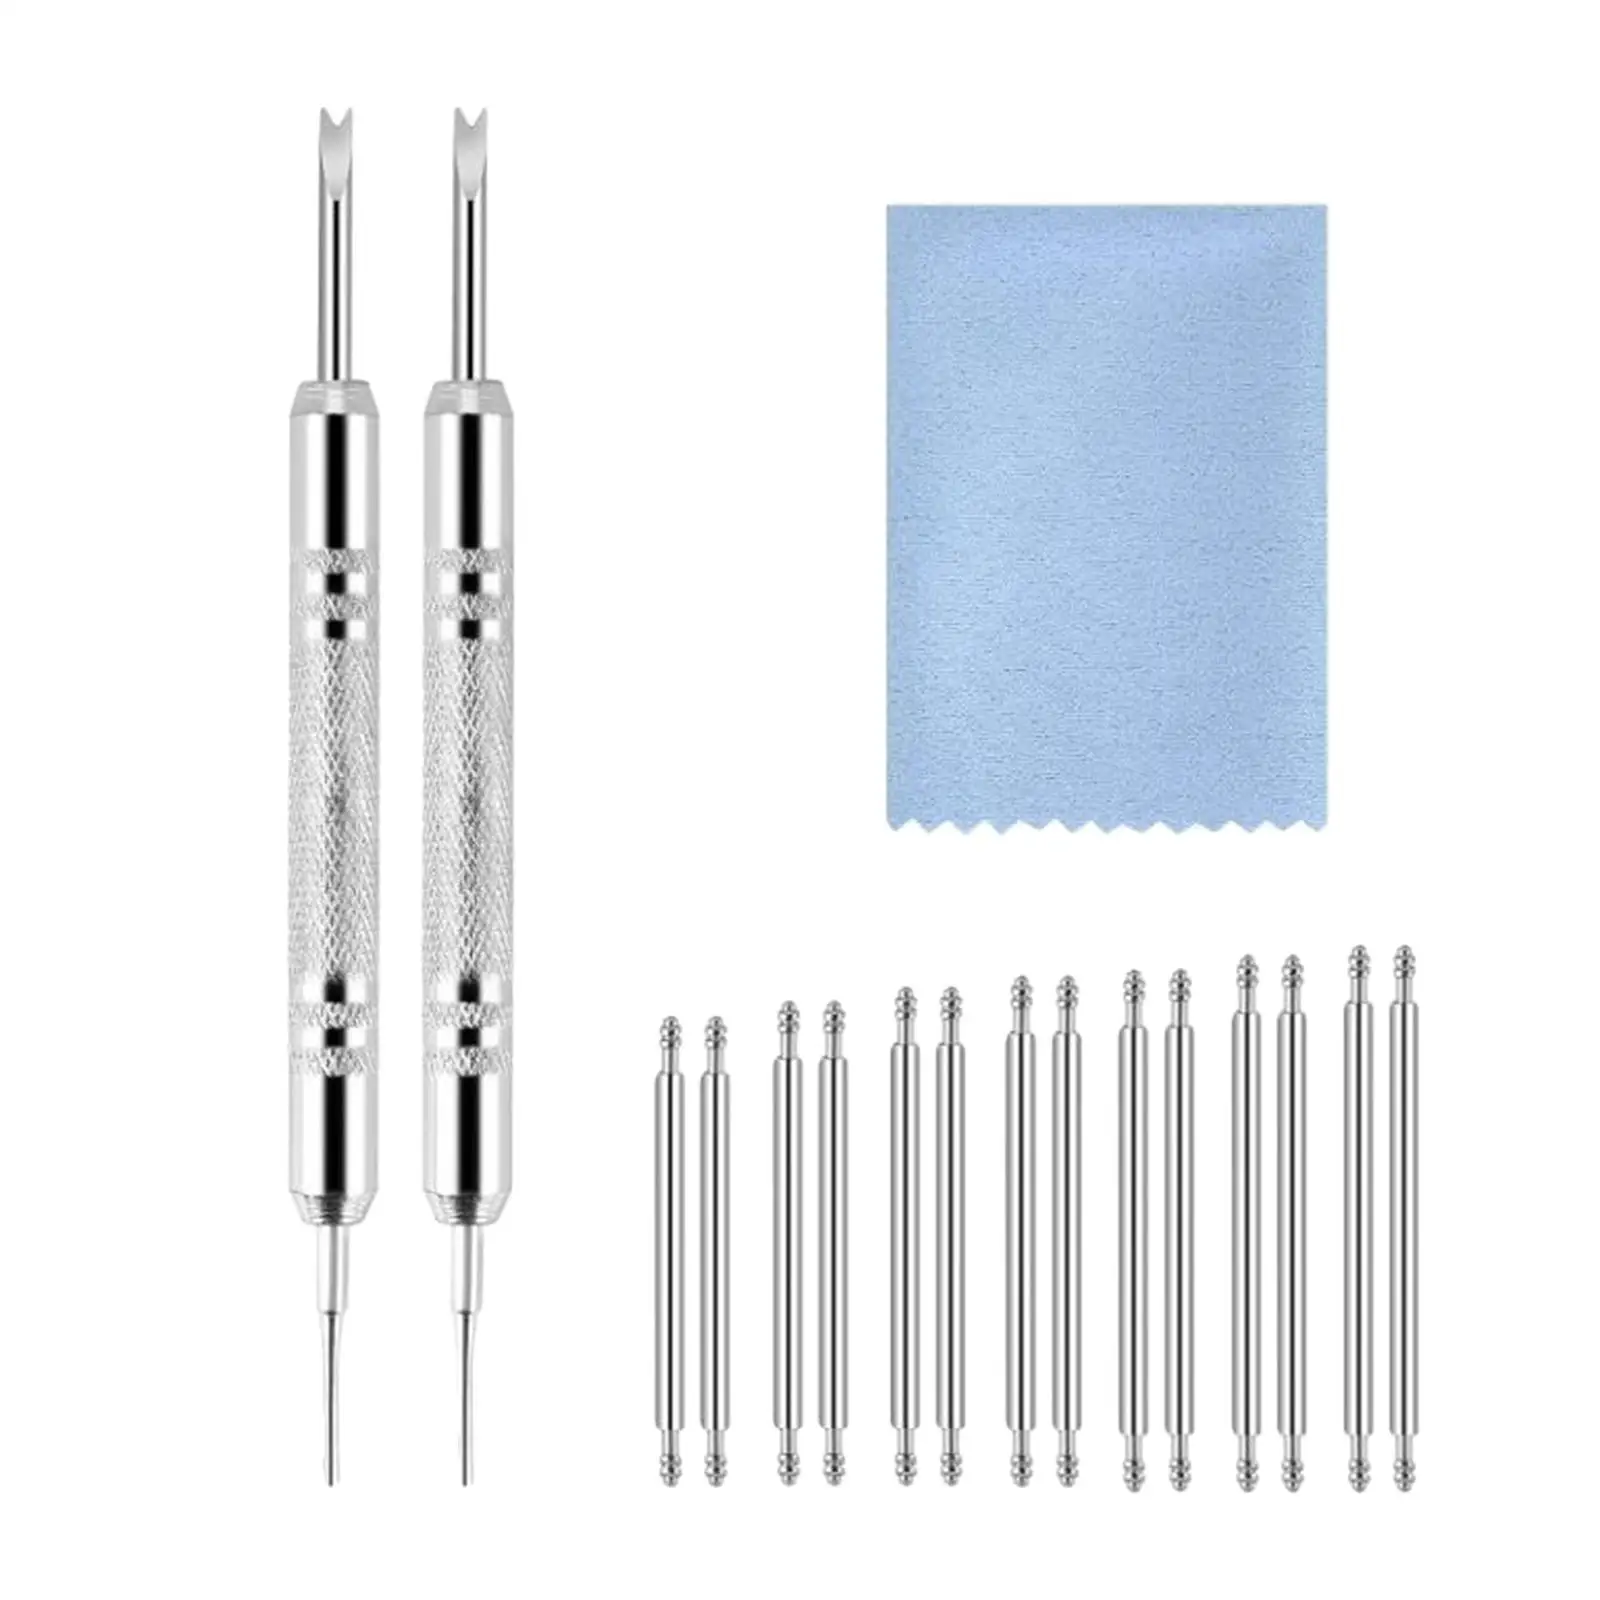 Watch Link Remover Kit Repair Tool Adjustment Fixing Watch Repair Kit Watch Band Pins for Watch Accessories Watch Band Removal